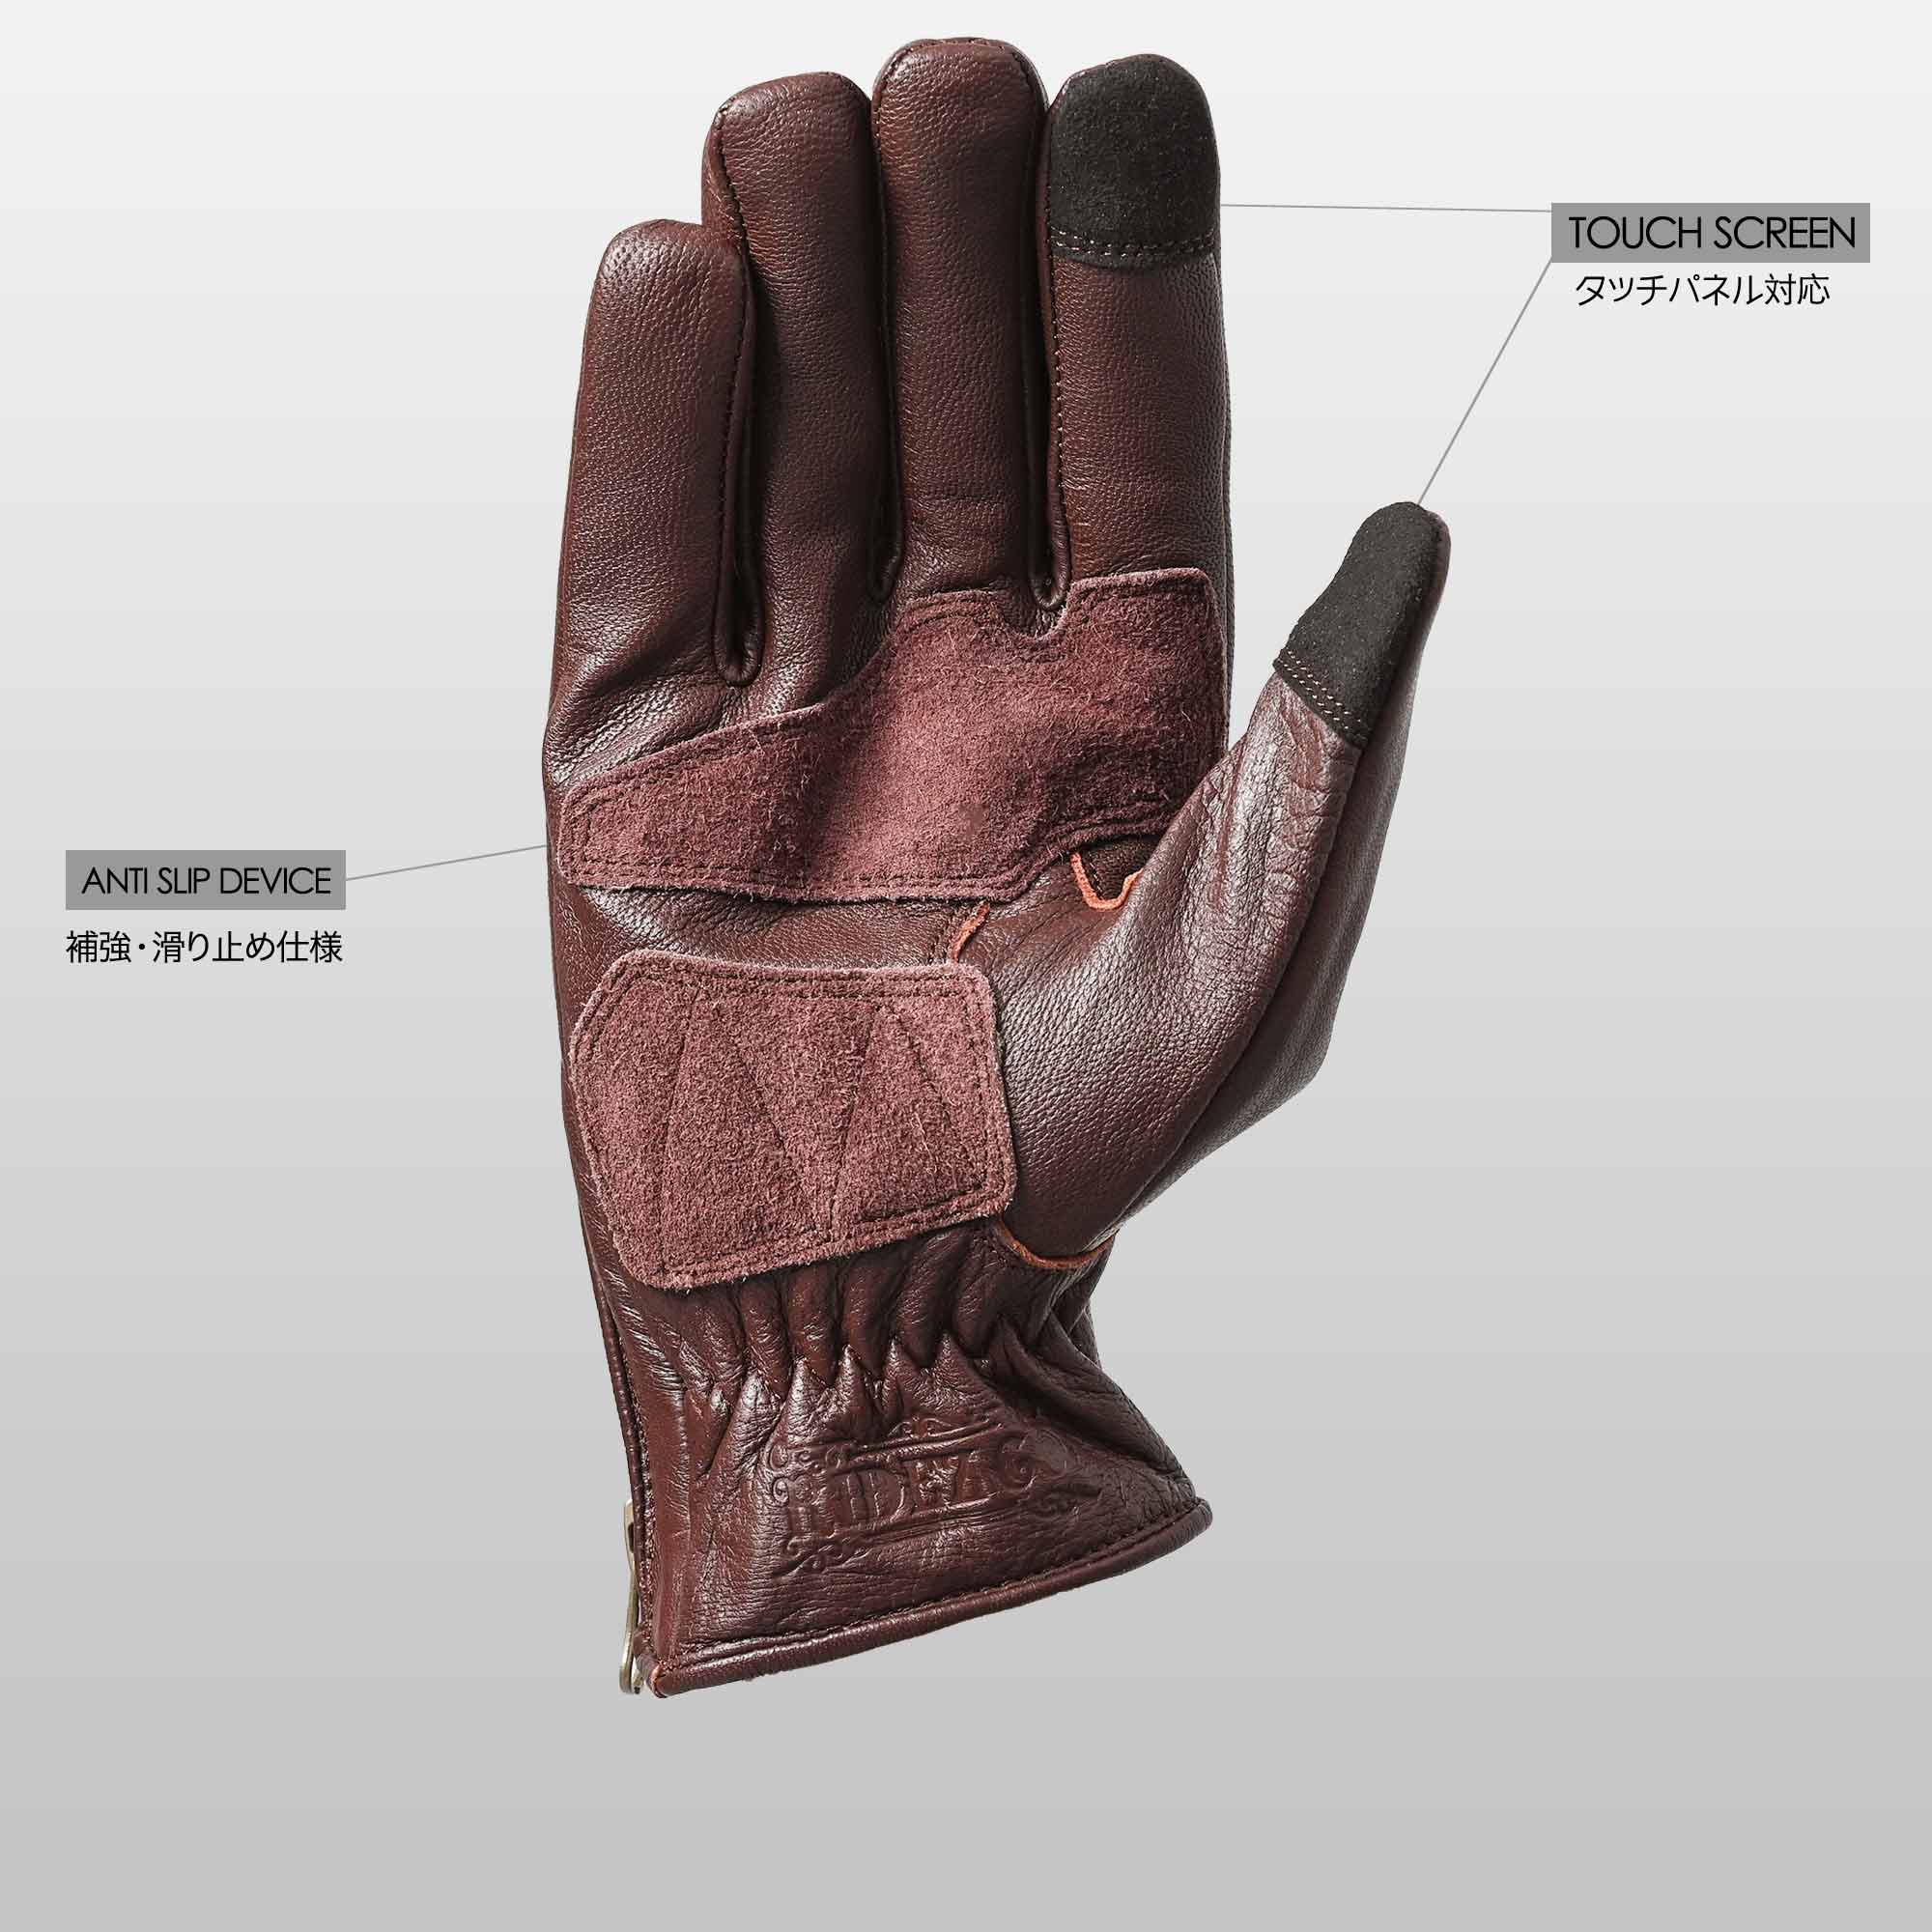 RIDEZ MOTO GLOVES VINTAGE Autumn/Winter Cold Protection Motorcycle Gloves RUSSET BROWN RLG75 